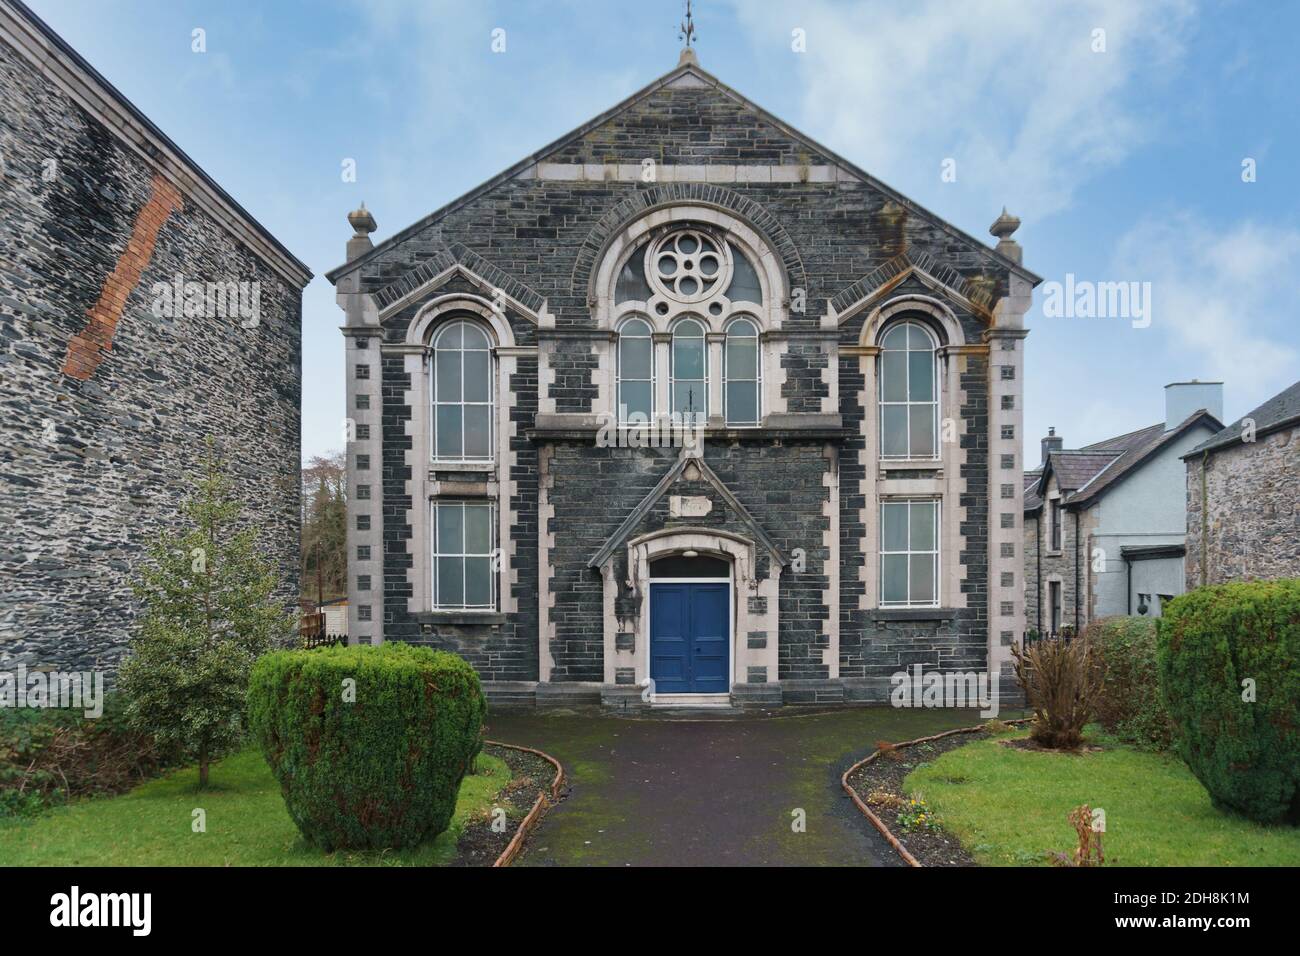 Seion united presbyterian church of Wales in Corwen North Wales built in 1875 Stock Photo